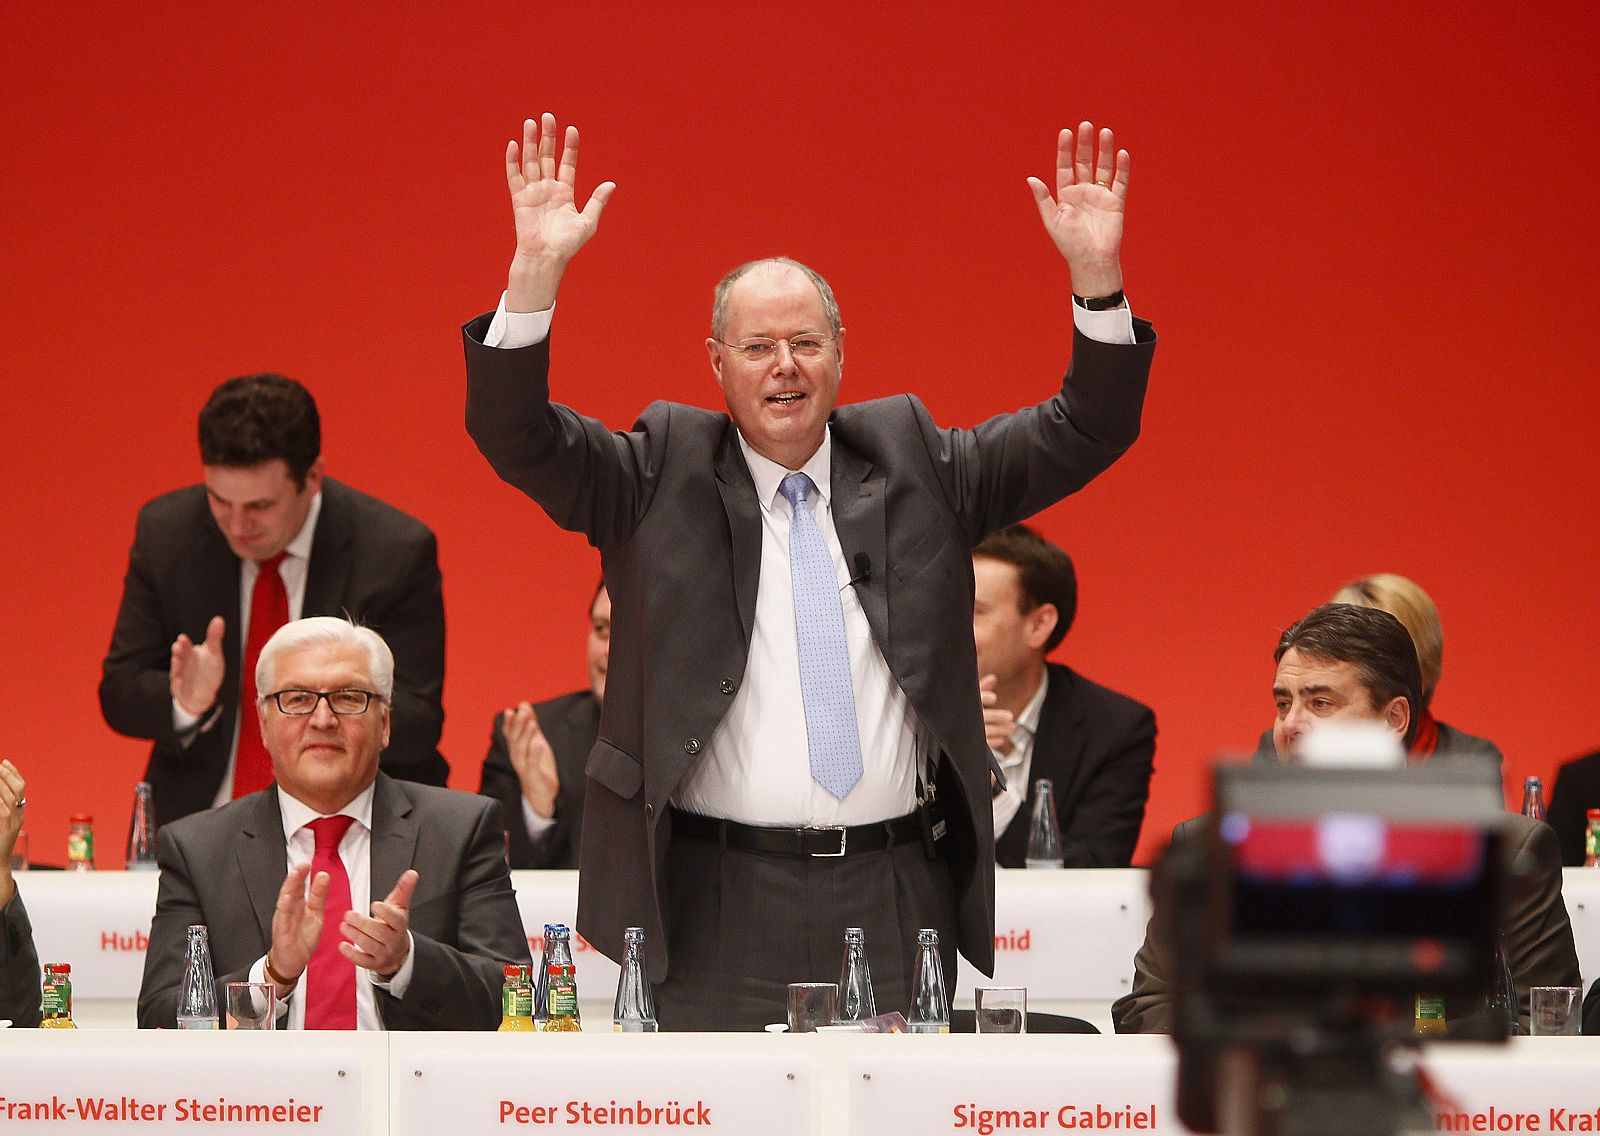 Designated top candidate of the German Social Democratic Party (SPD) for the 2013 German general elections, Steinbrueck acknowledges the applause of the audience after his speech during the extraordinary party meeting of the SPD in Hanover